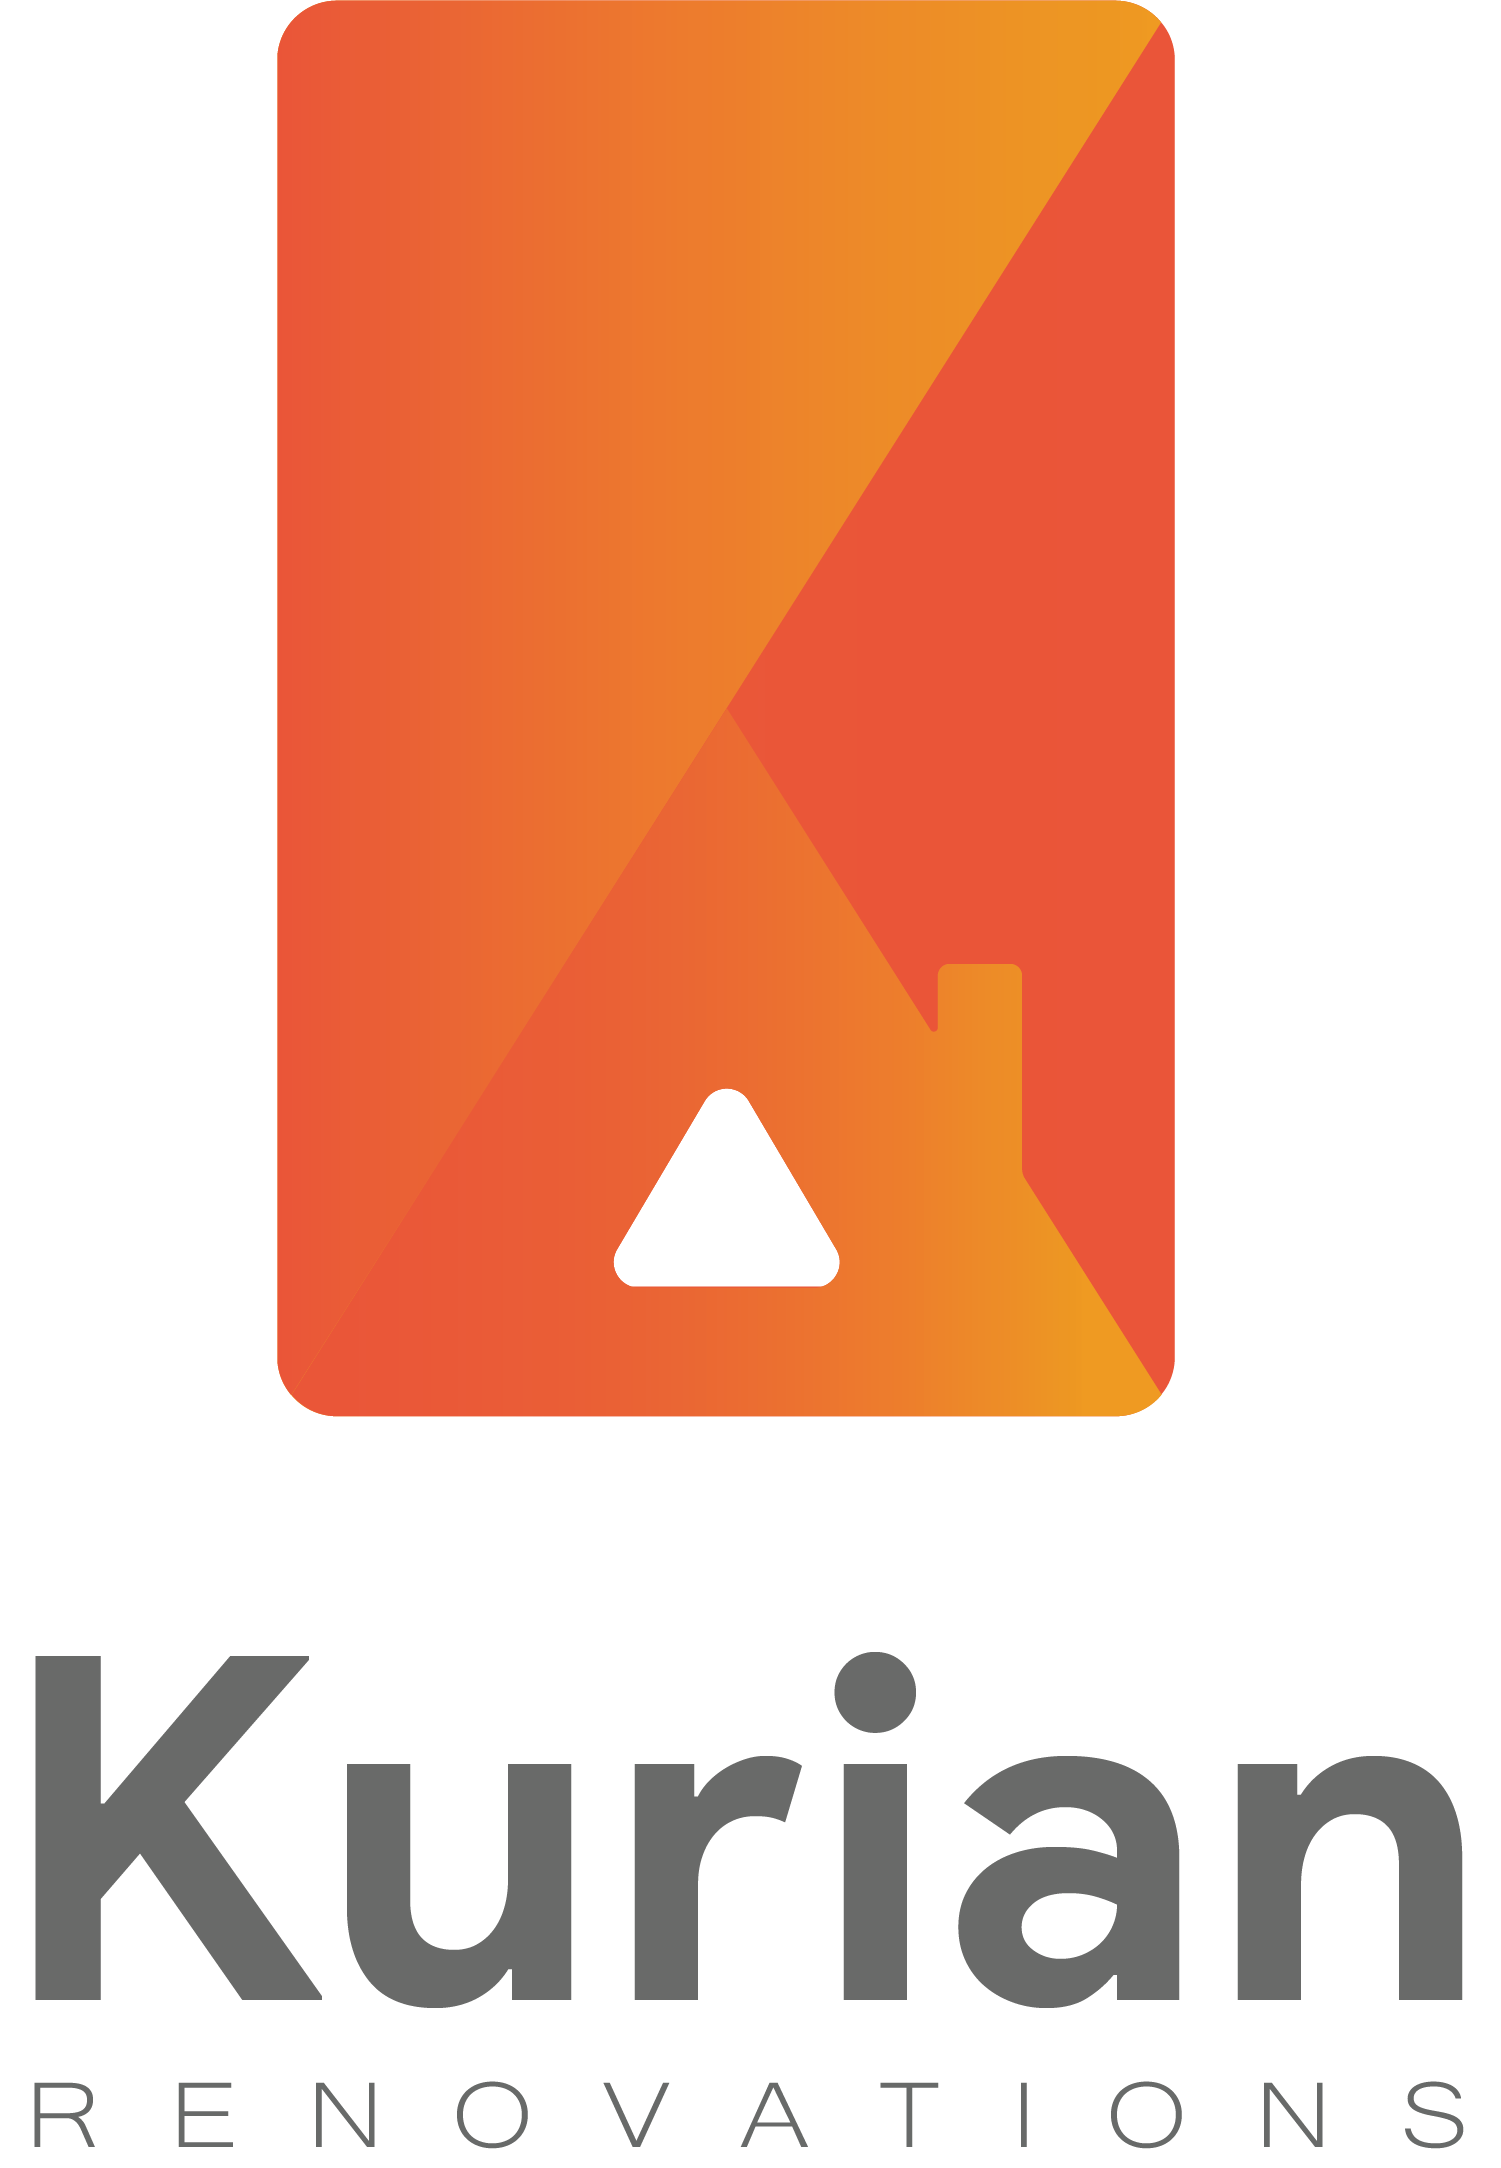 Kurian Renovations based in New Jersey